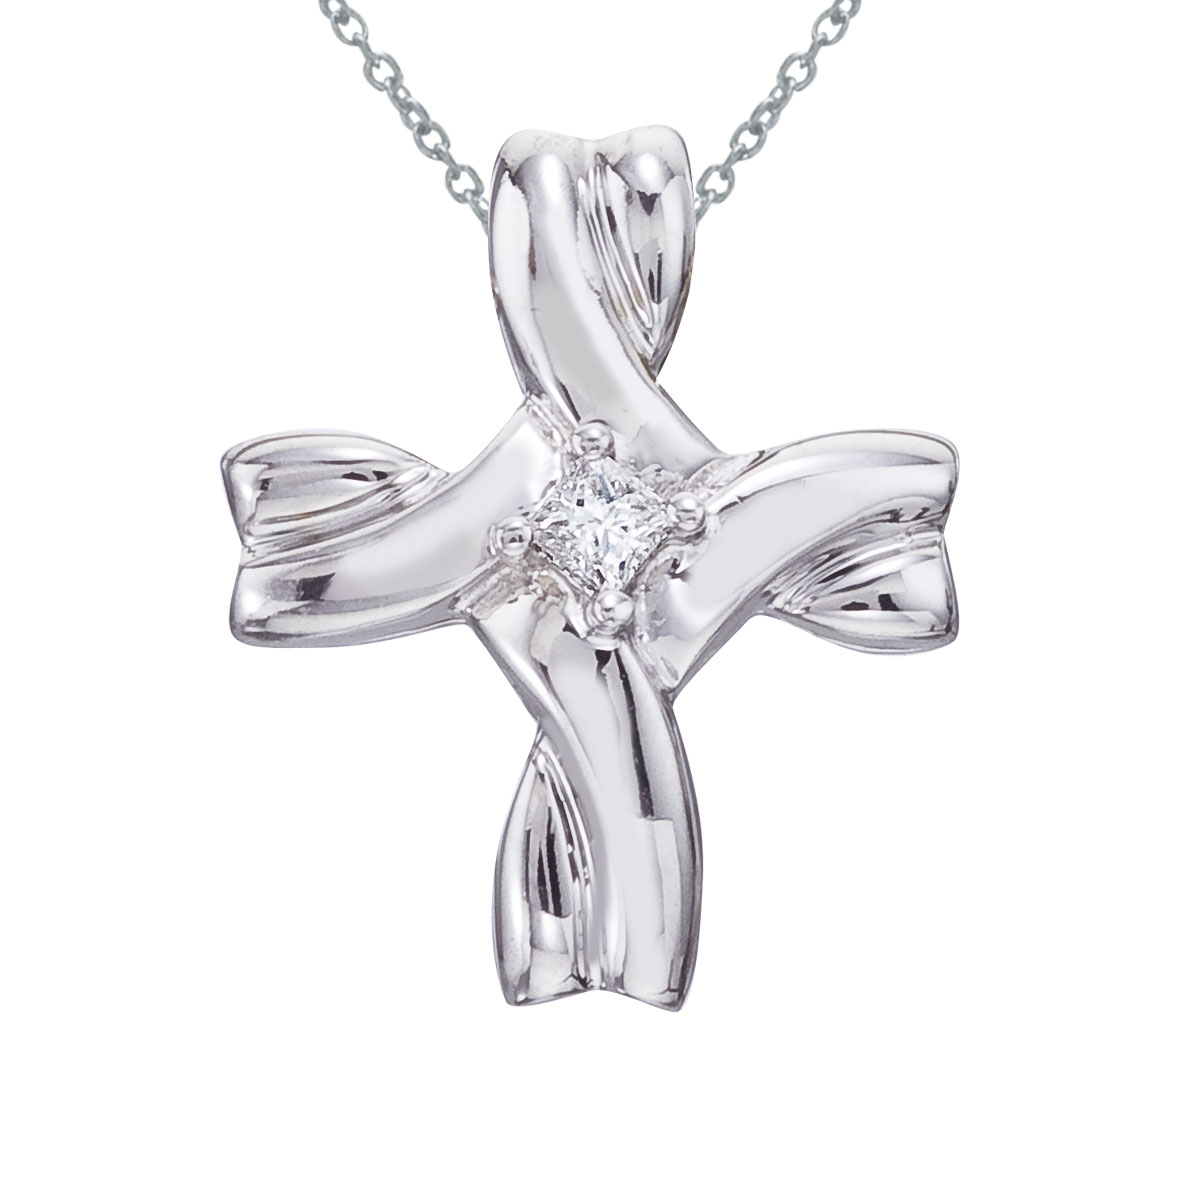 This 14k white gold diamond cross features a unique swirl design and .08 ct sparkling diamonds.